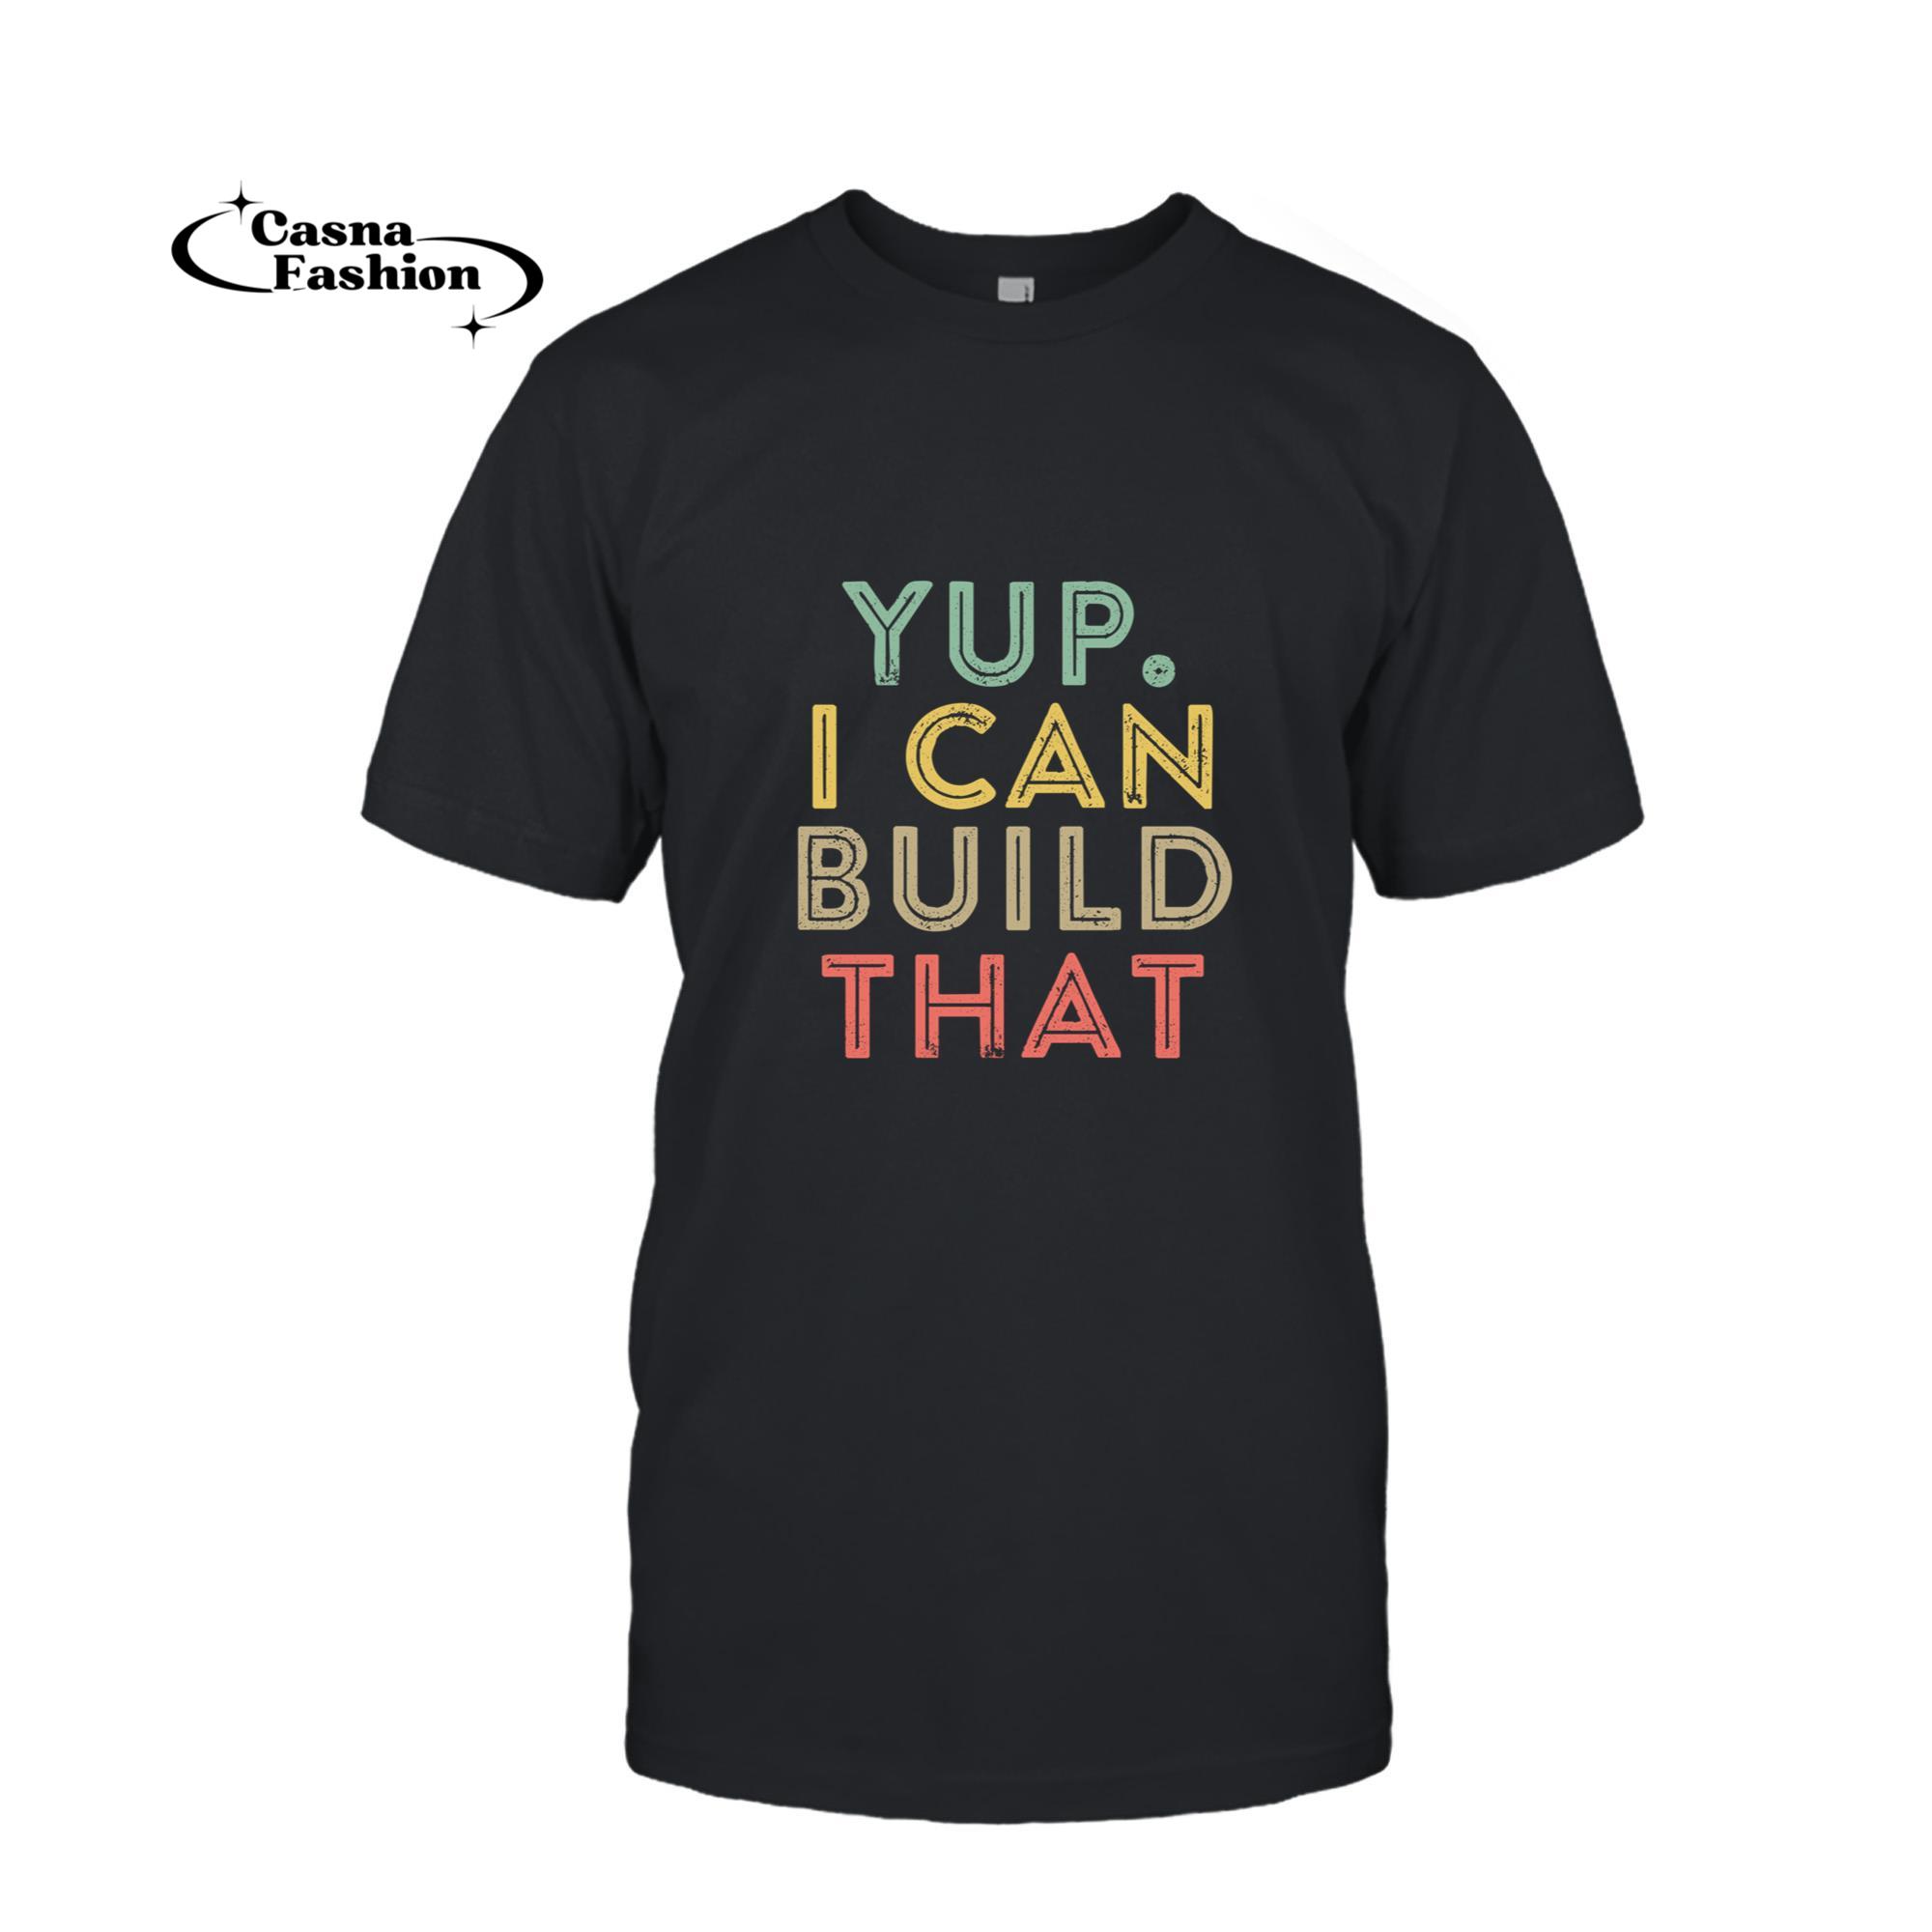 casnafashion_T-shirt_Yup I Can Build That Funny Woodworking Carpenter Quote Gift Long Sleeve T-Shirt_T-shirt_Black